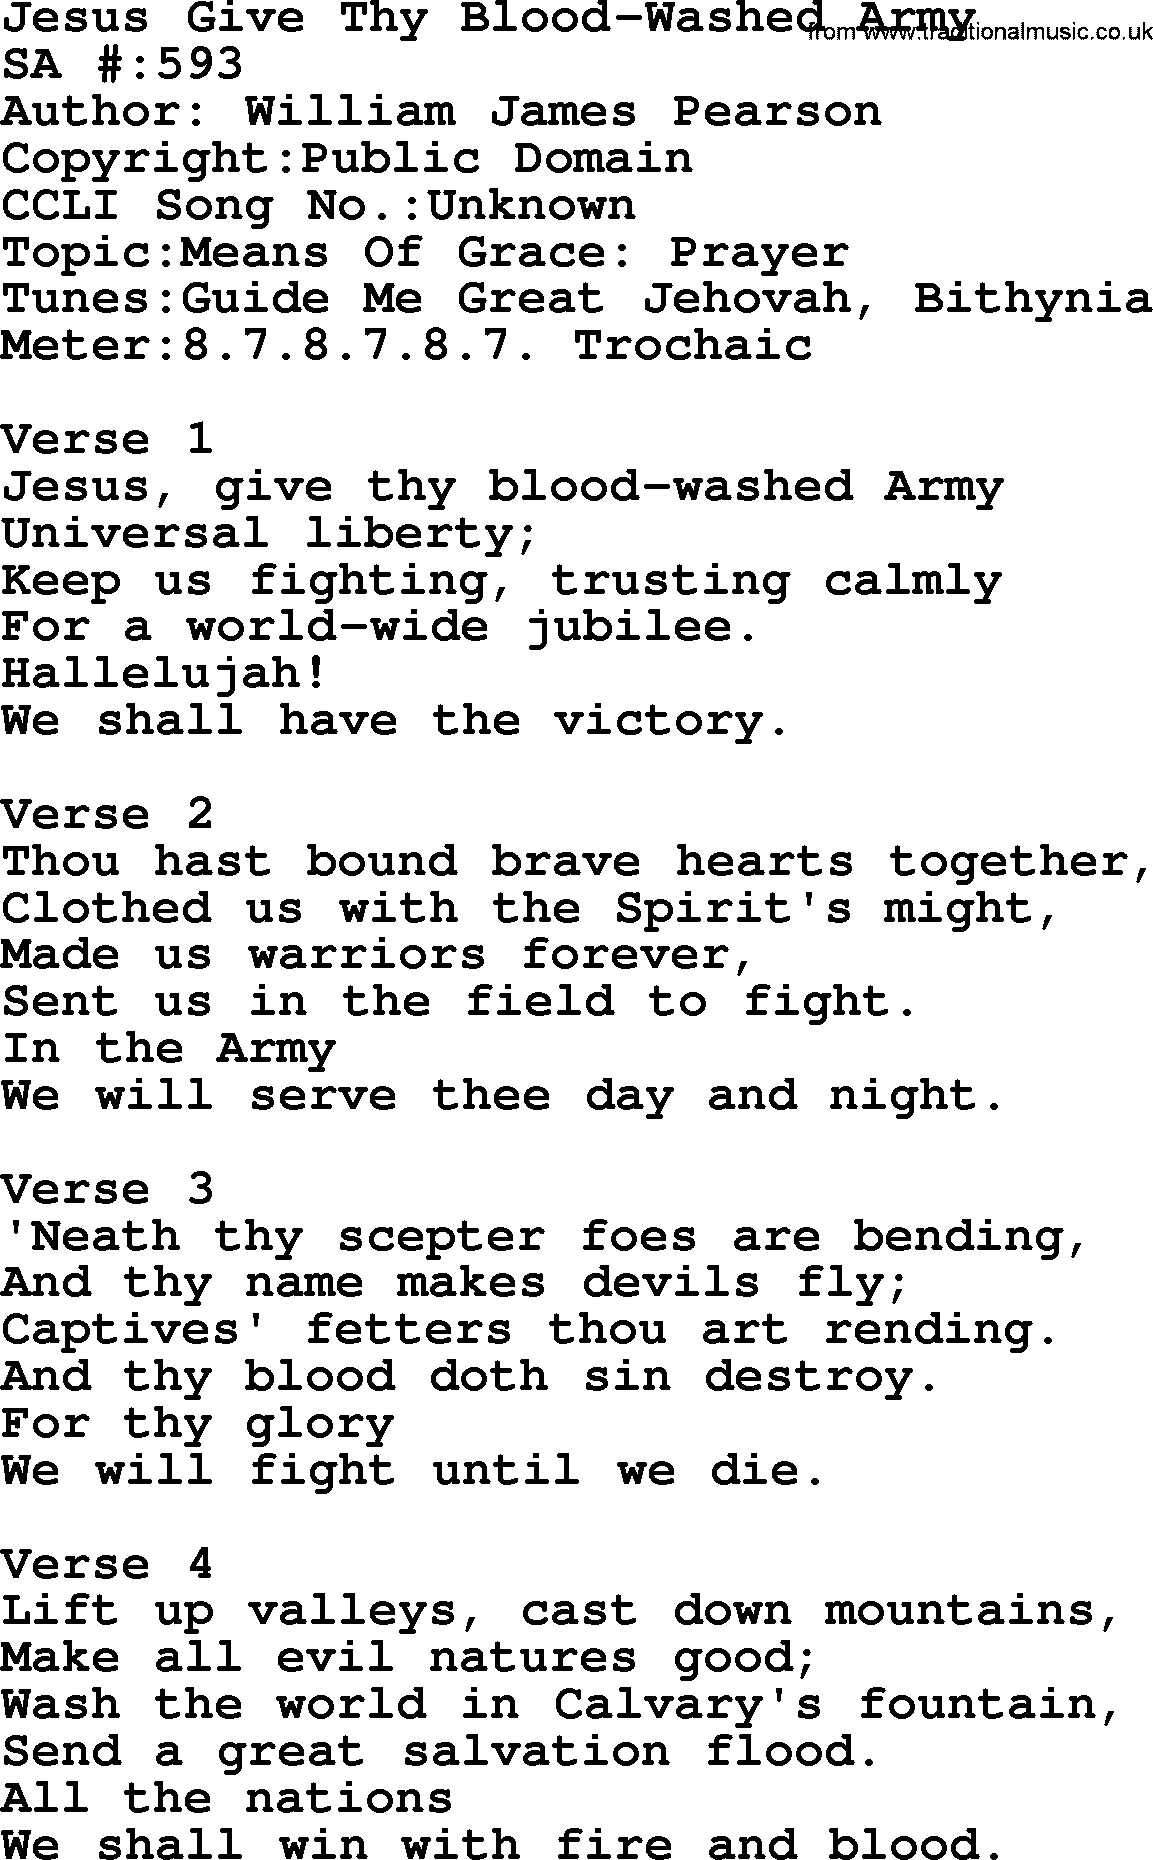 Salvation Army Hymnal, title: Jesus Give Thy Blood-Washed Army, with lyrics and PDF,